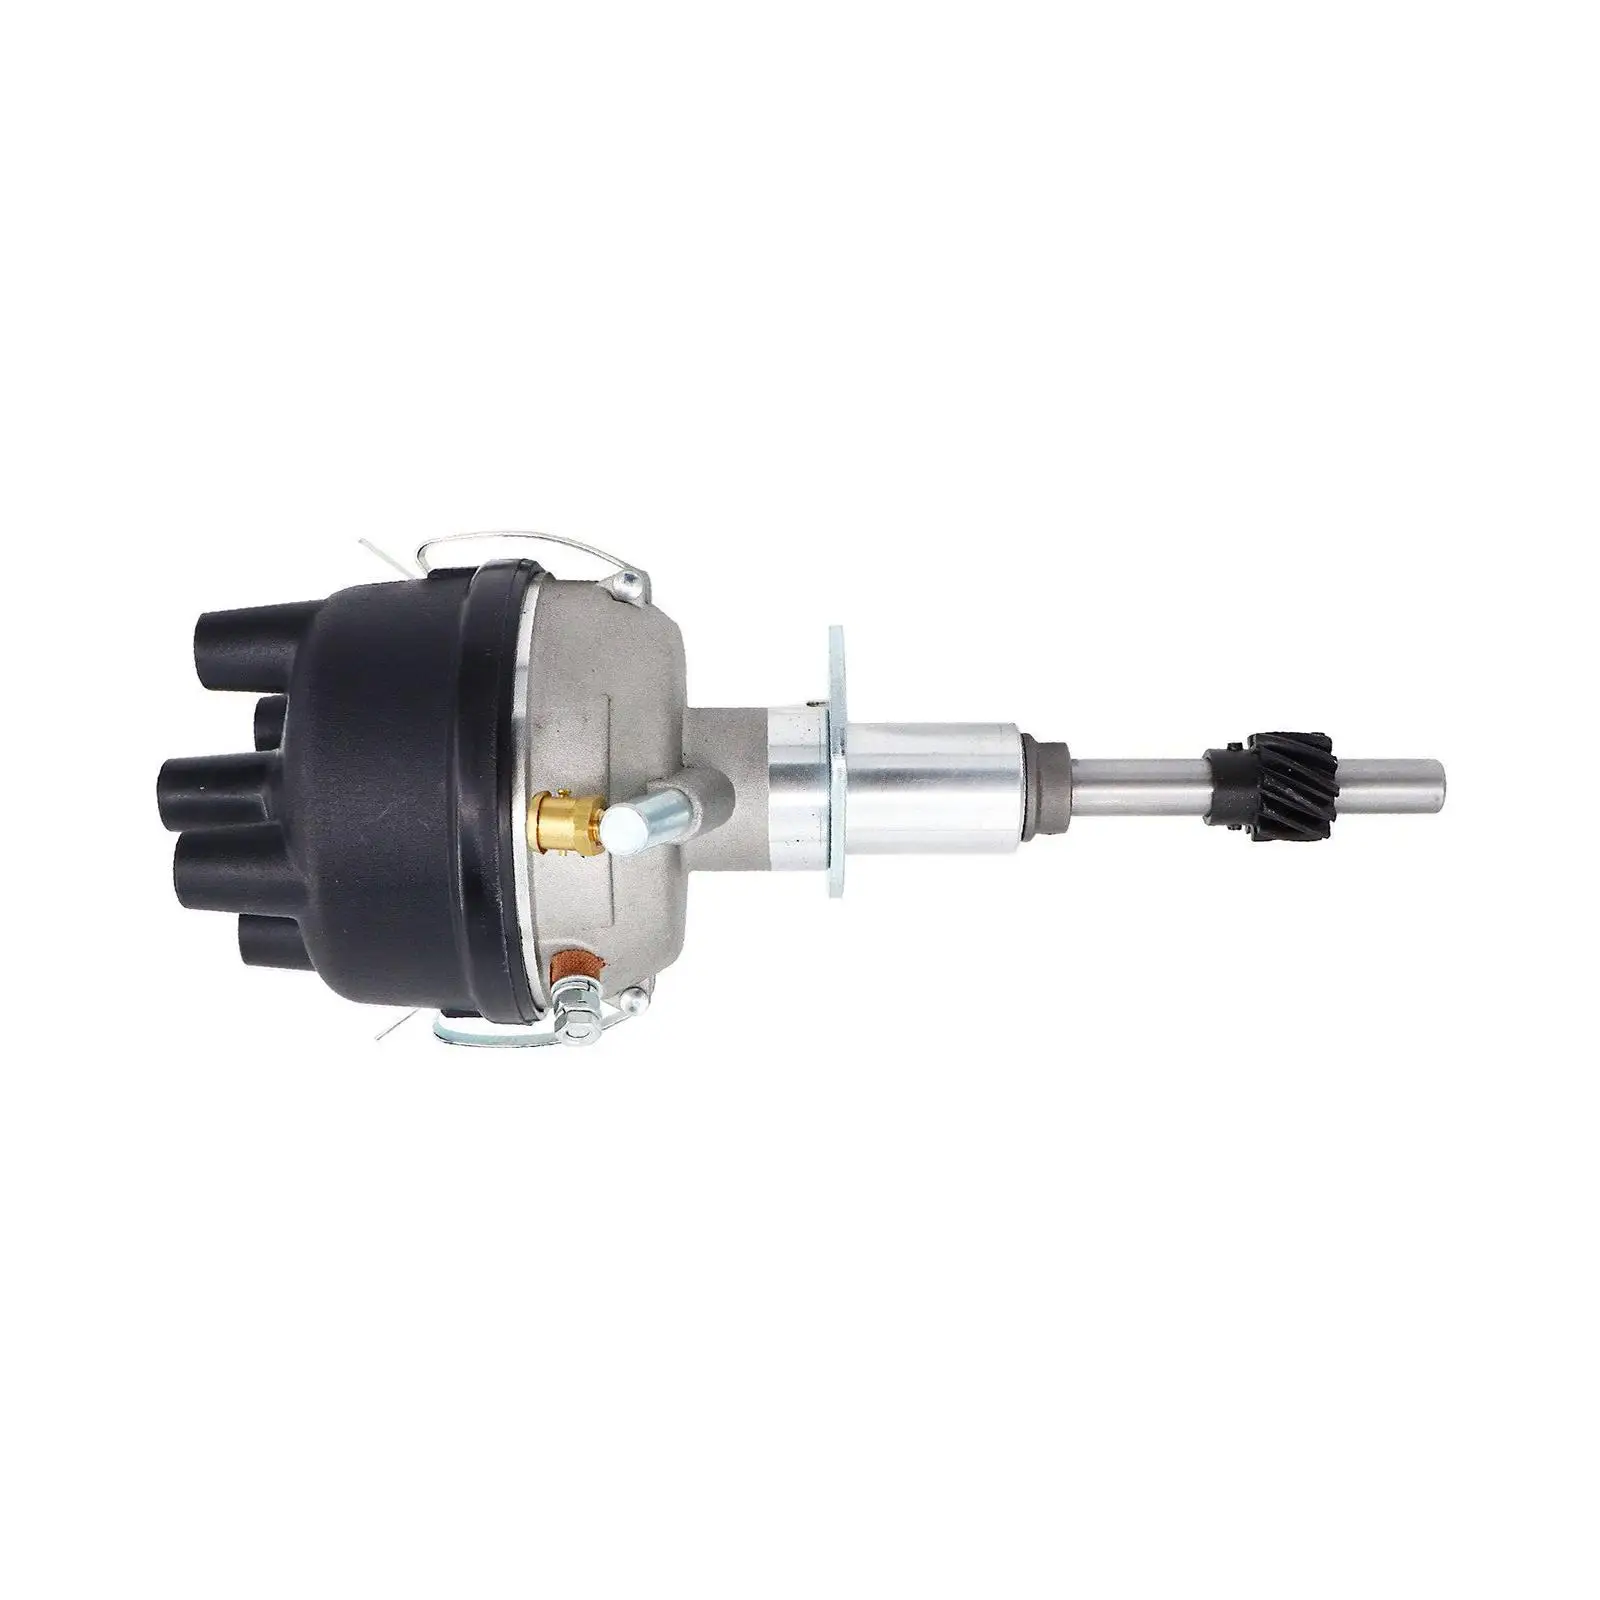 Tractor Ignition Distributor 8N12127B Precise Metal Components Assembly Professional 1100-4999 Replacement for  8N